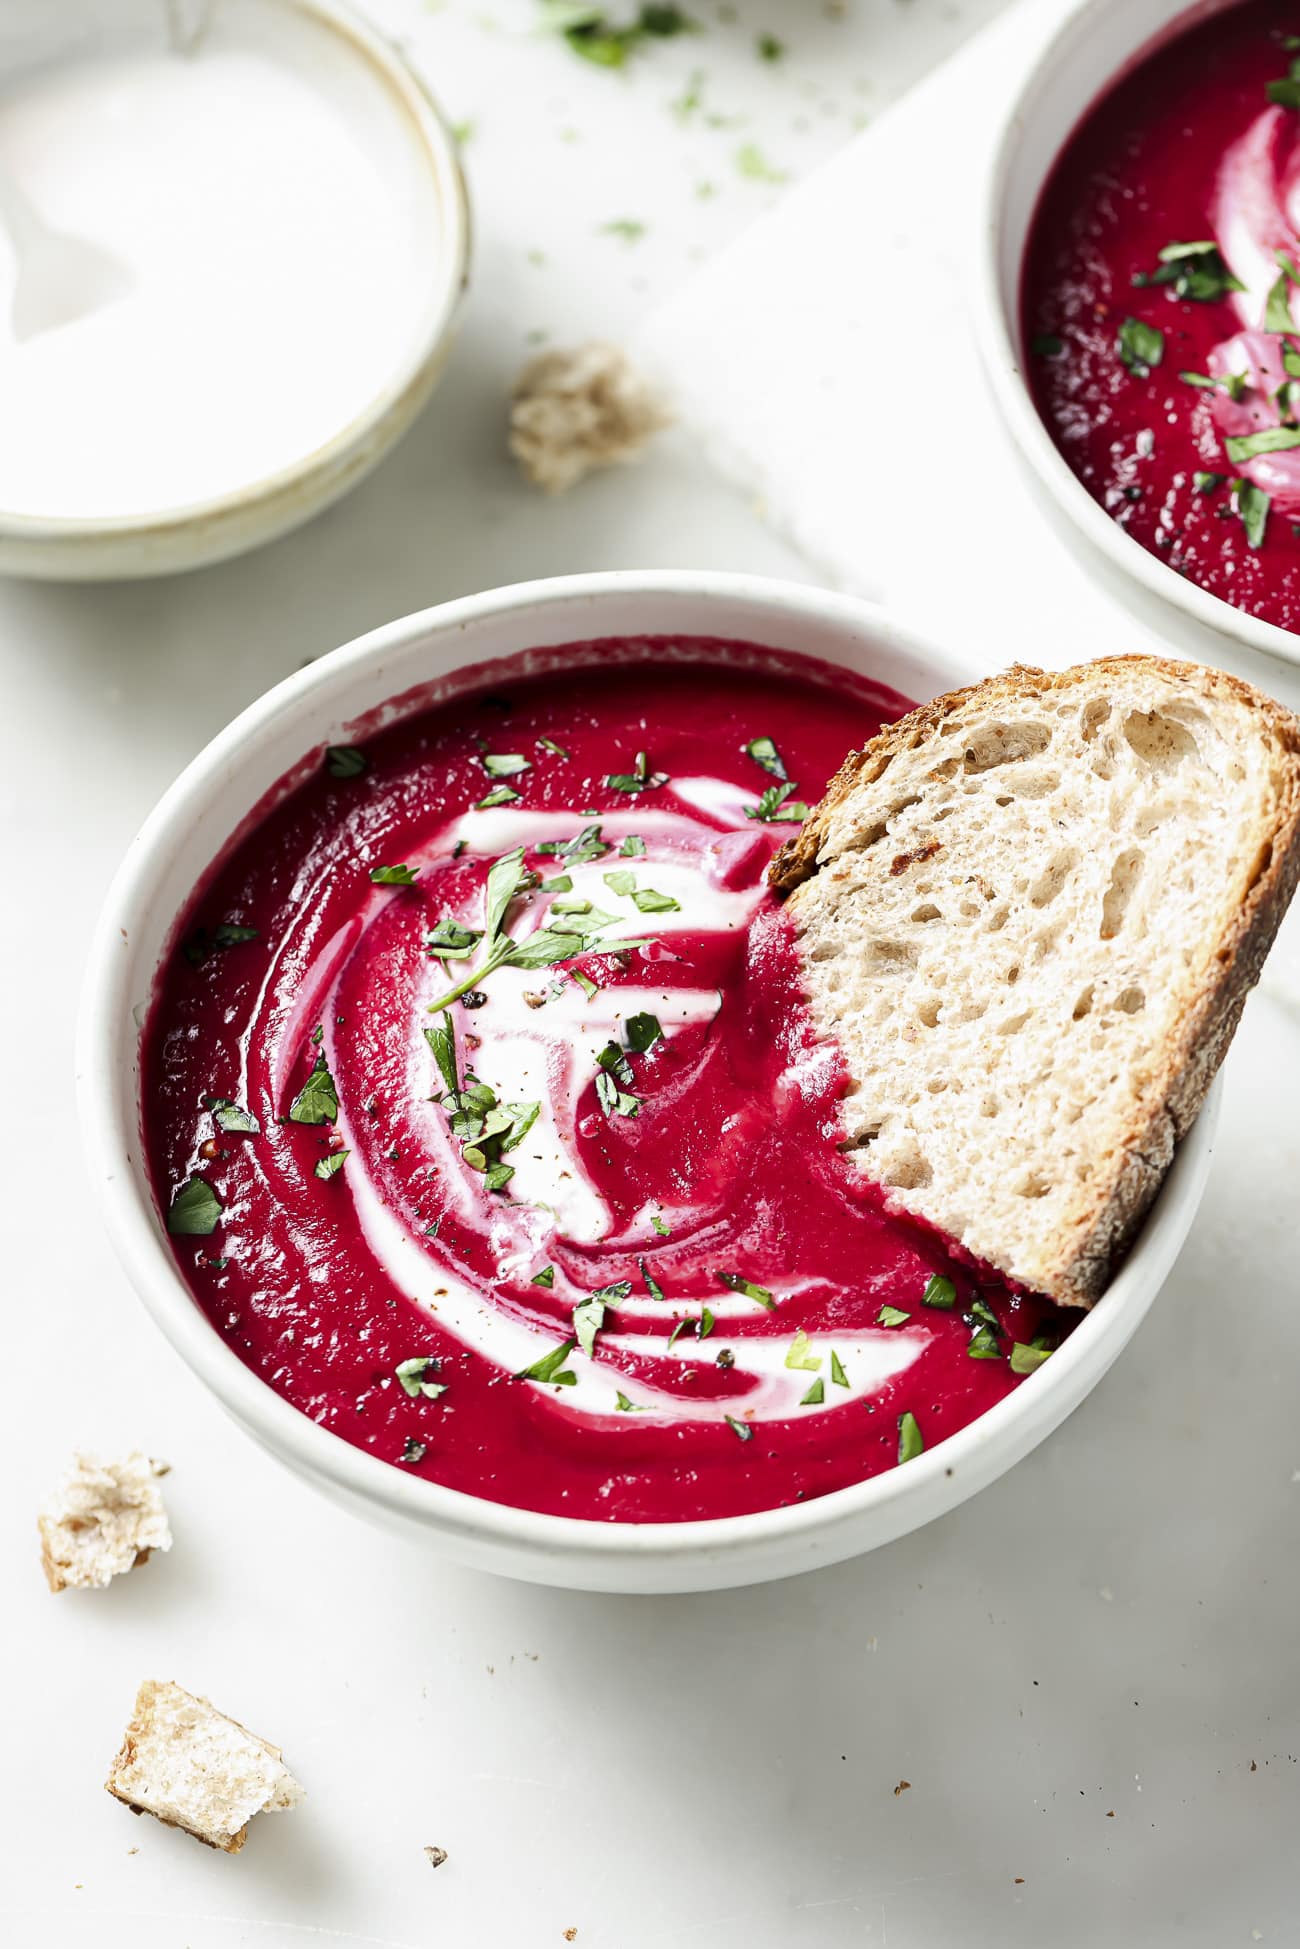 Beet soup in a white bowl with garnish and a slice of bread.